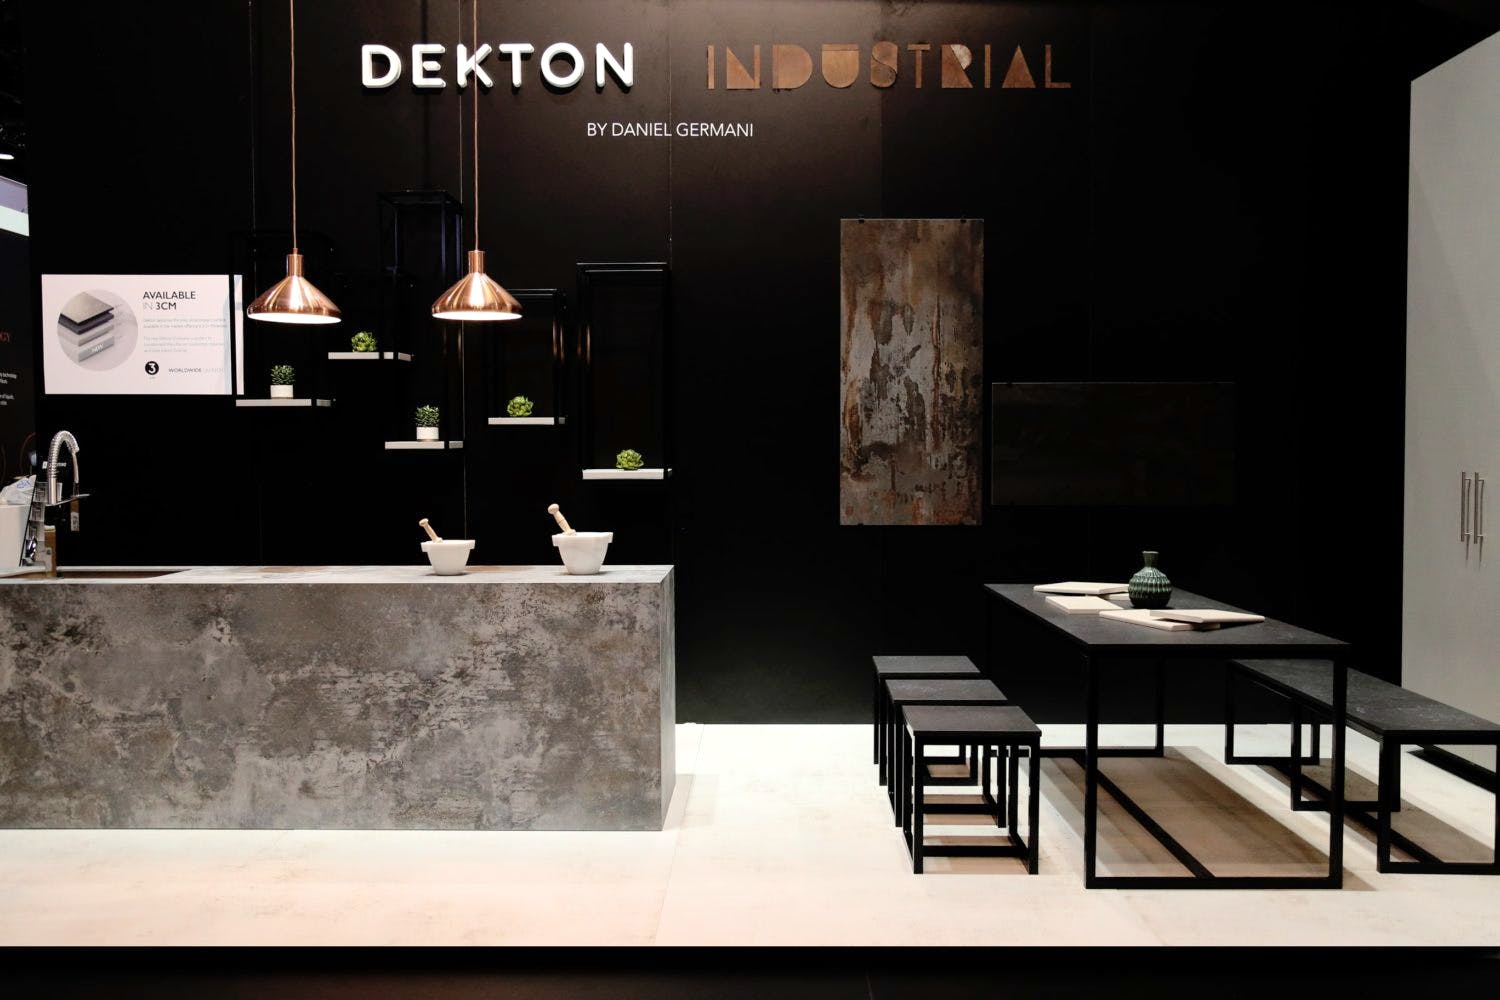 Image of Dekton Industrial Stand Cosentino KBIS 2018 lr 1500x1000 6 in Madrid welcomes Cosentino Group´s first "City" in Spain - Cosentino